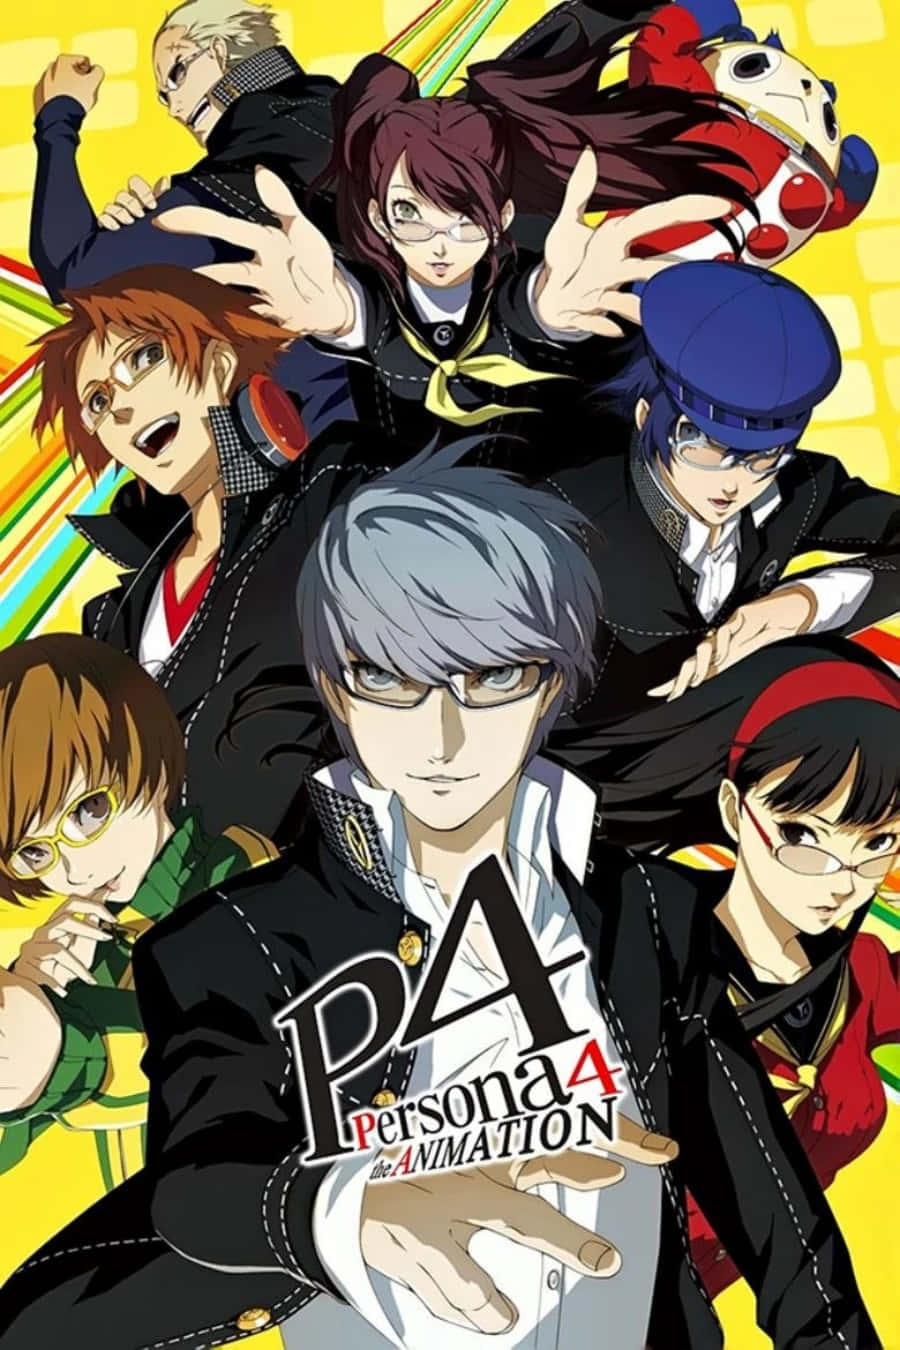 Review your strategy before tackling a tough boss fight in Persona 4